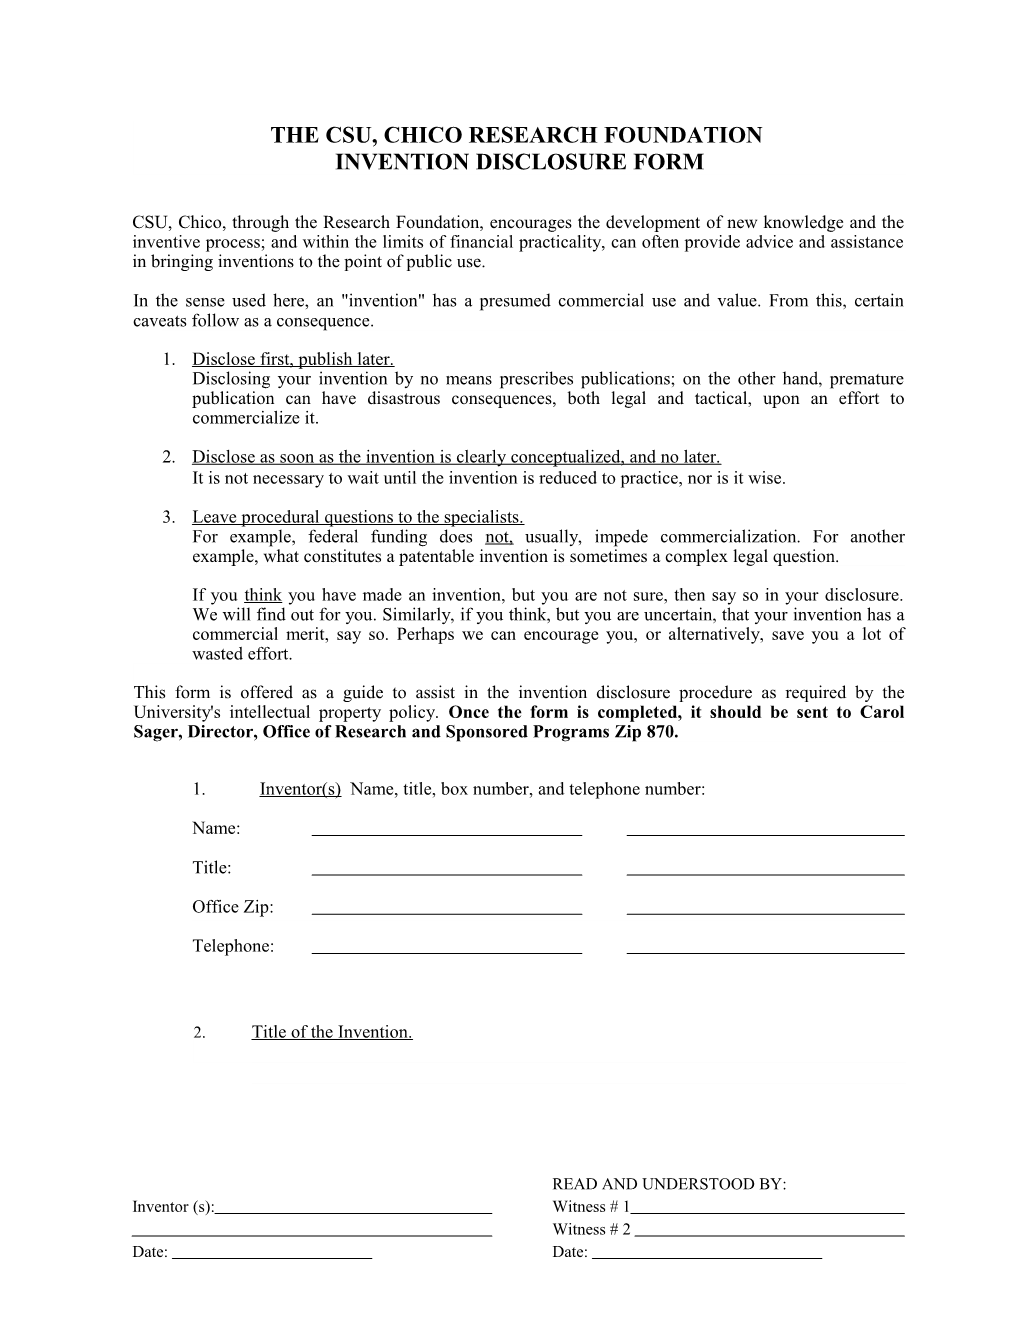 The Csu, Chico Research Foundation Invention Disclosure Form